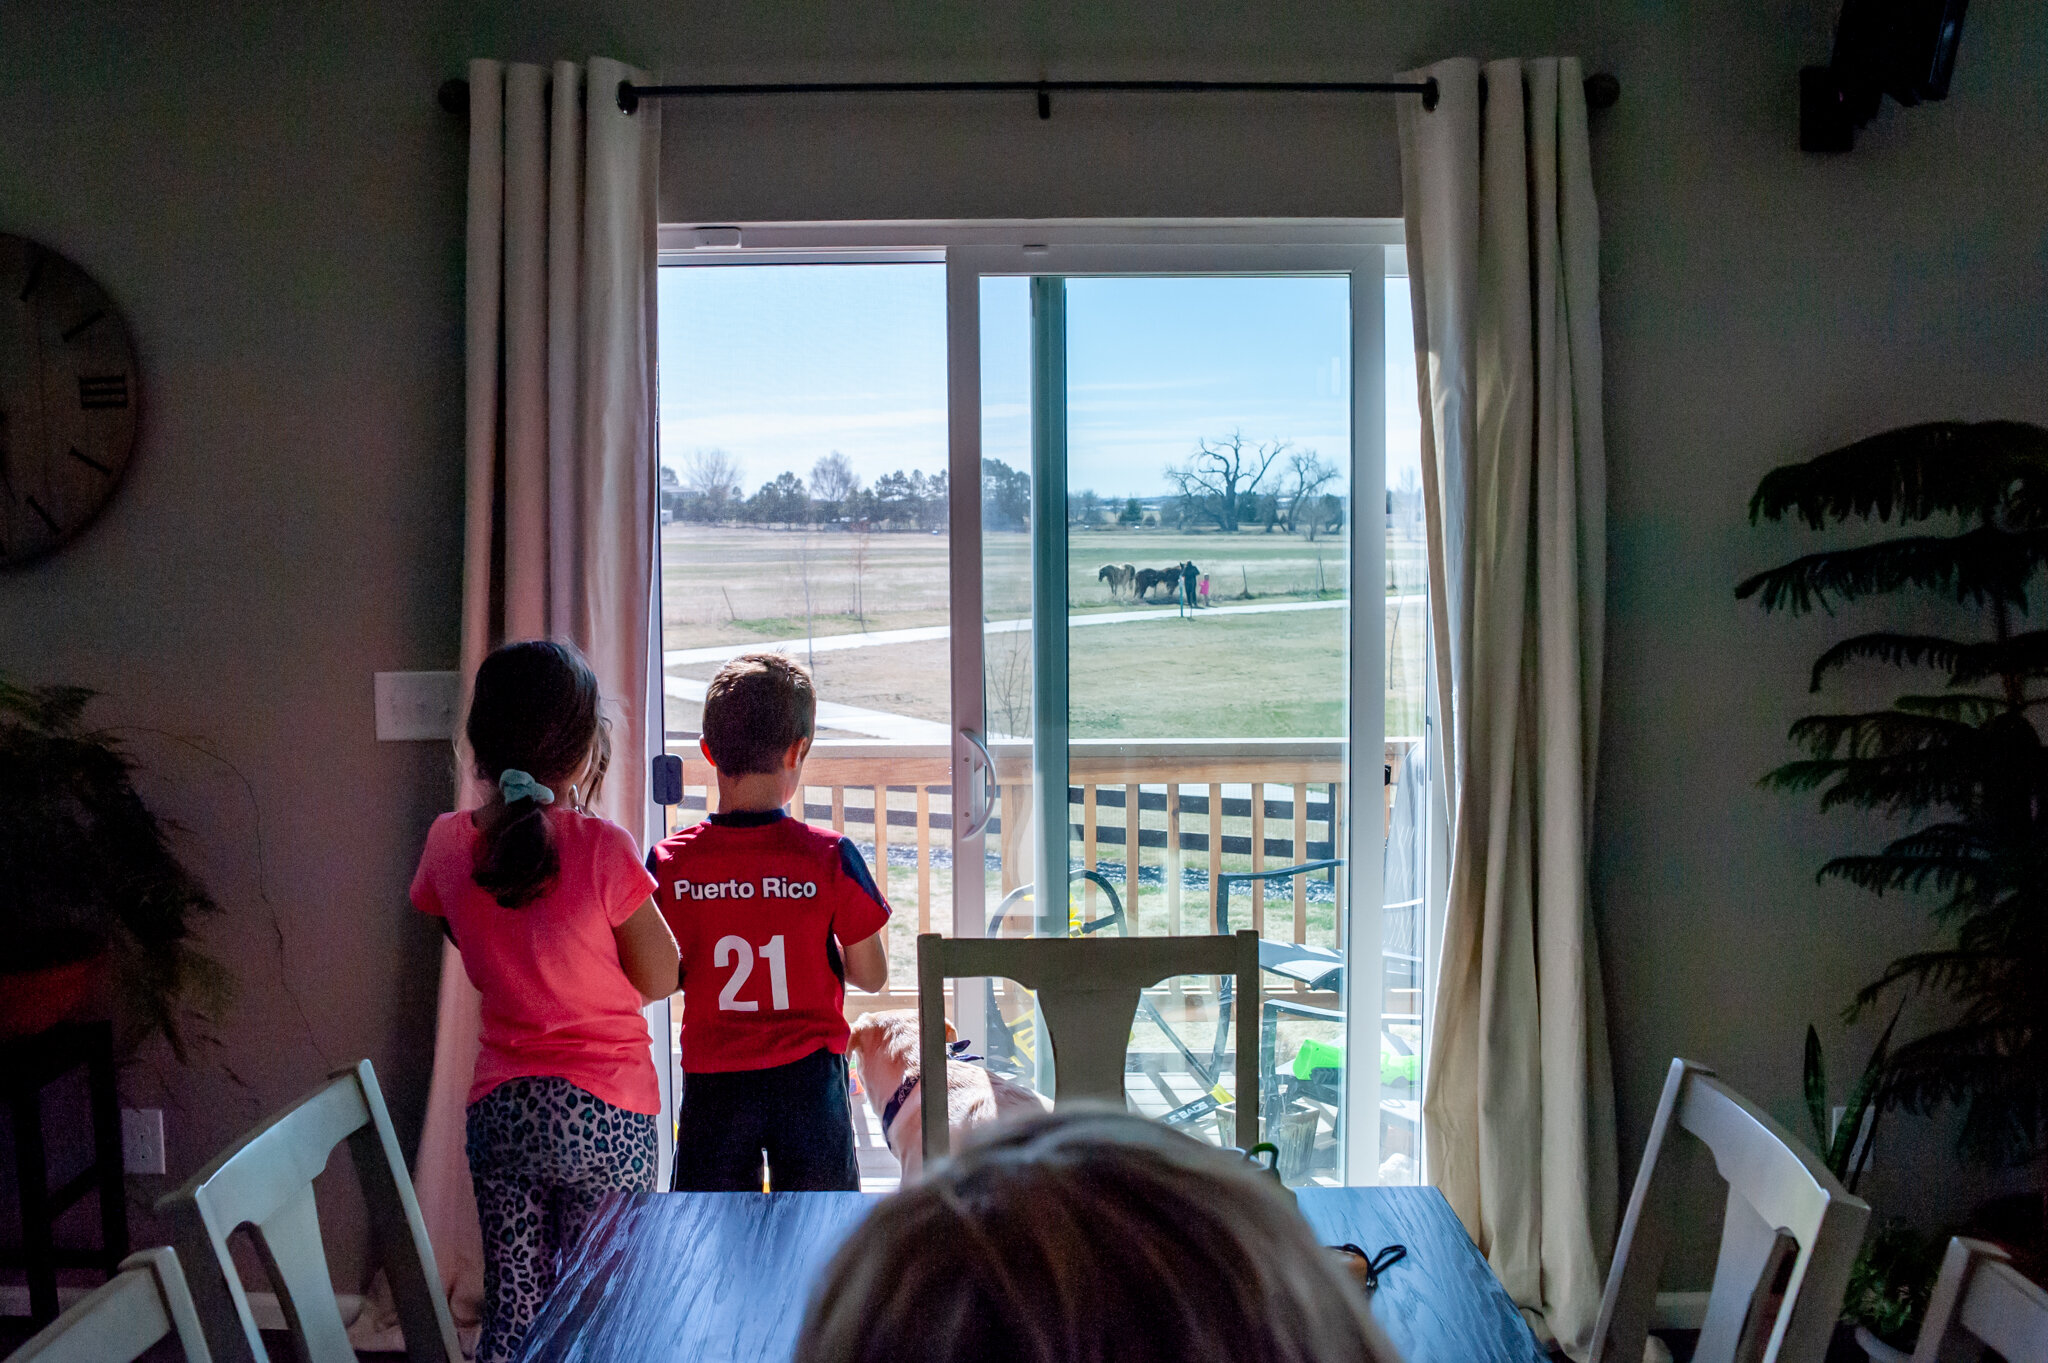  Ruben and Cecilia Maldonado, 8, look at horses outside from their home in Timnath, Colo., on Wednesday, March 25, 2020. With schools closed to limit the spread of coronavirus their mother, Jacqueline Maldonado, has been homeschooling them. Valerie M